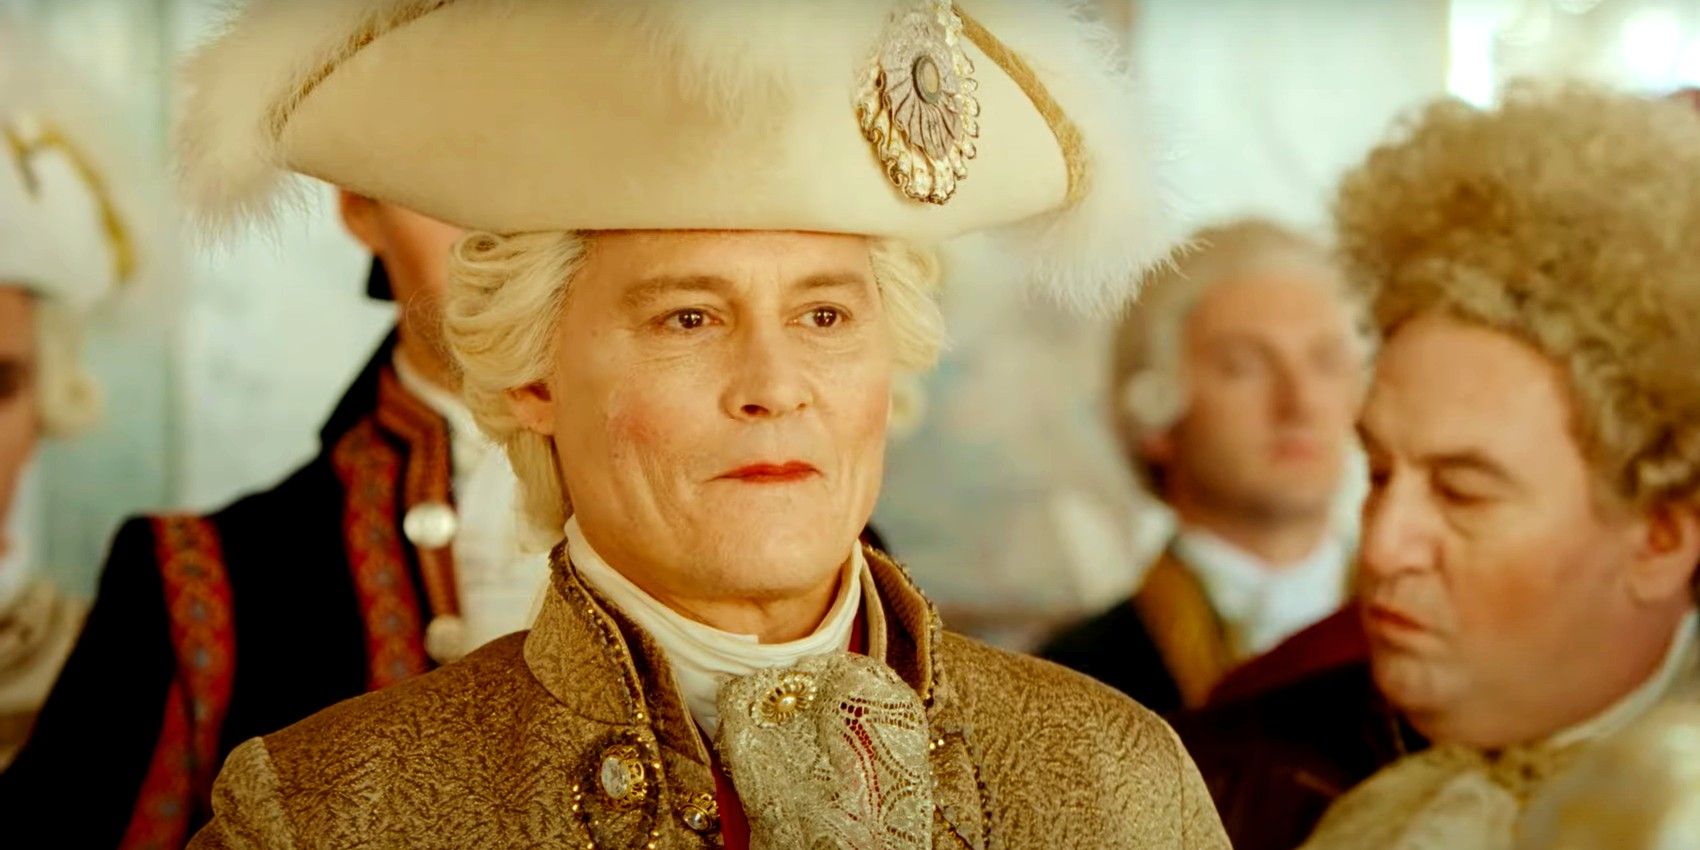 Jeanne Du Barry Review: Johnny Depp Returns In A Compelling, Unfocused French Period Drama Film